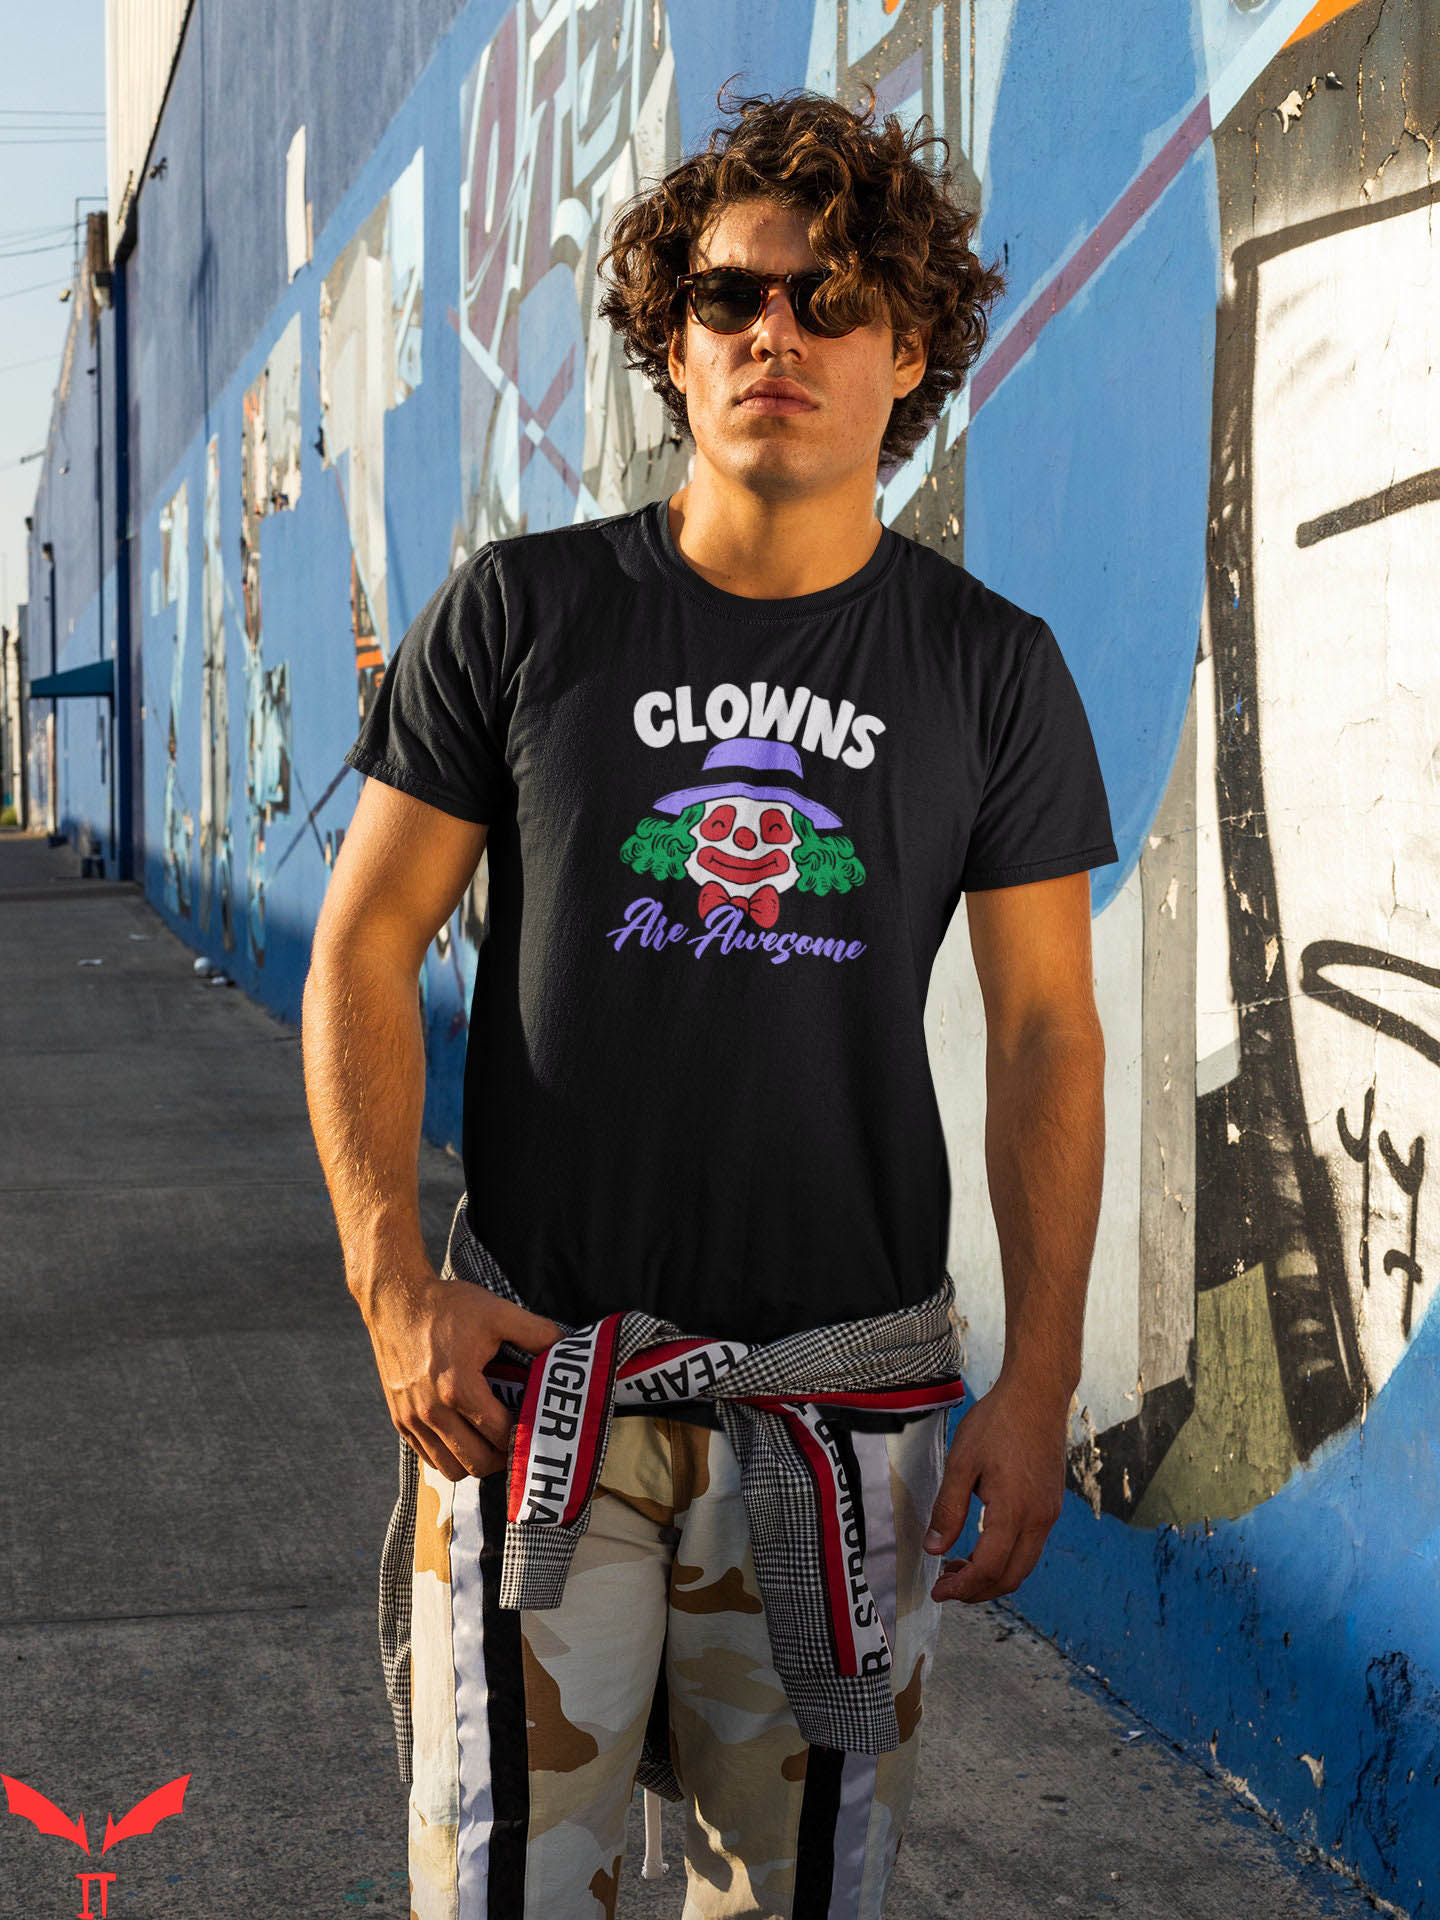 IT The Clown T-Shirt Clowns Are Awesome IT Clownery